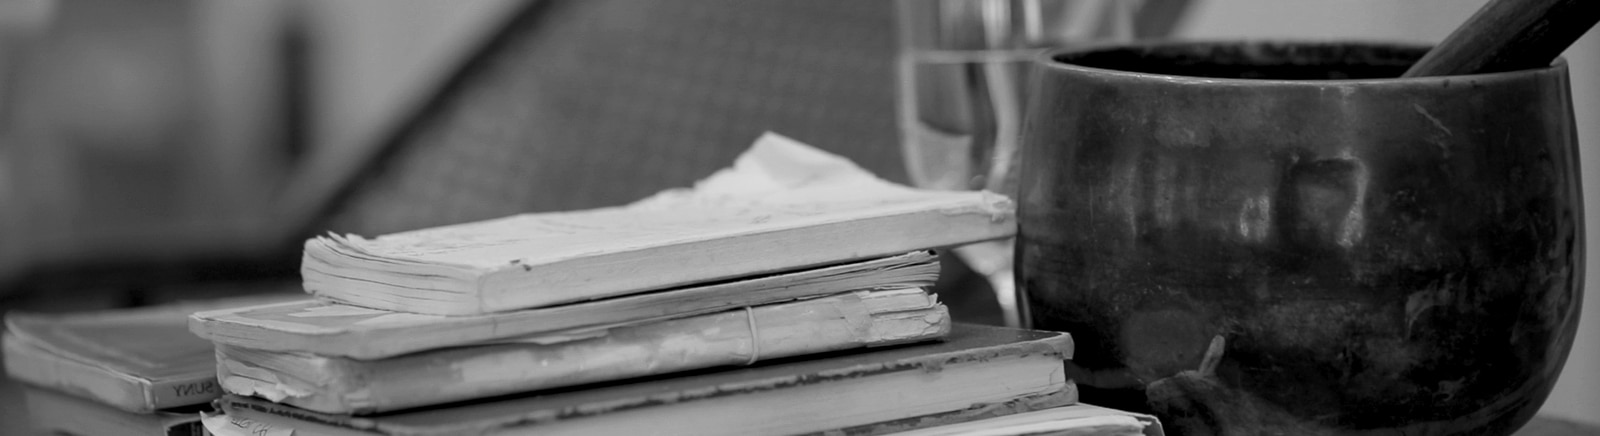 A black and white photograph with a dark colored singing bowl sitting to the right and a stack of weathered old books sits to the left while a glass of water is in the background.